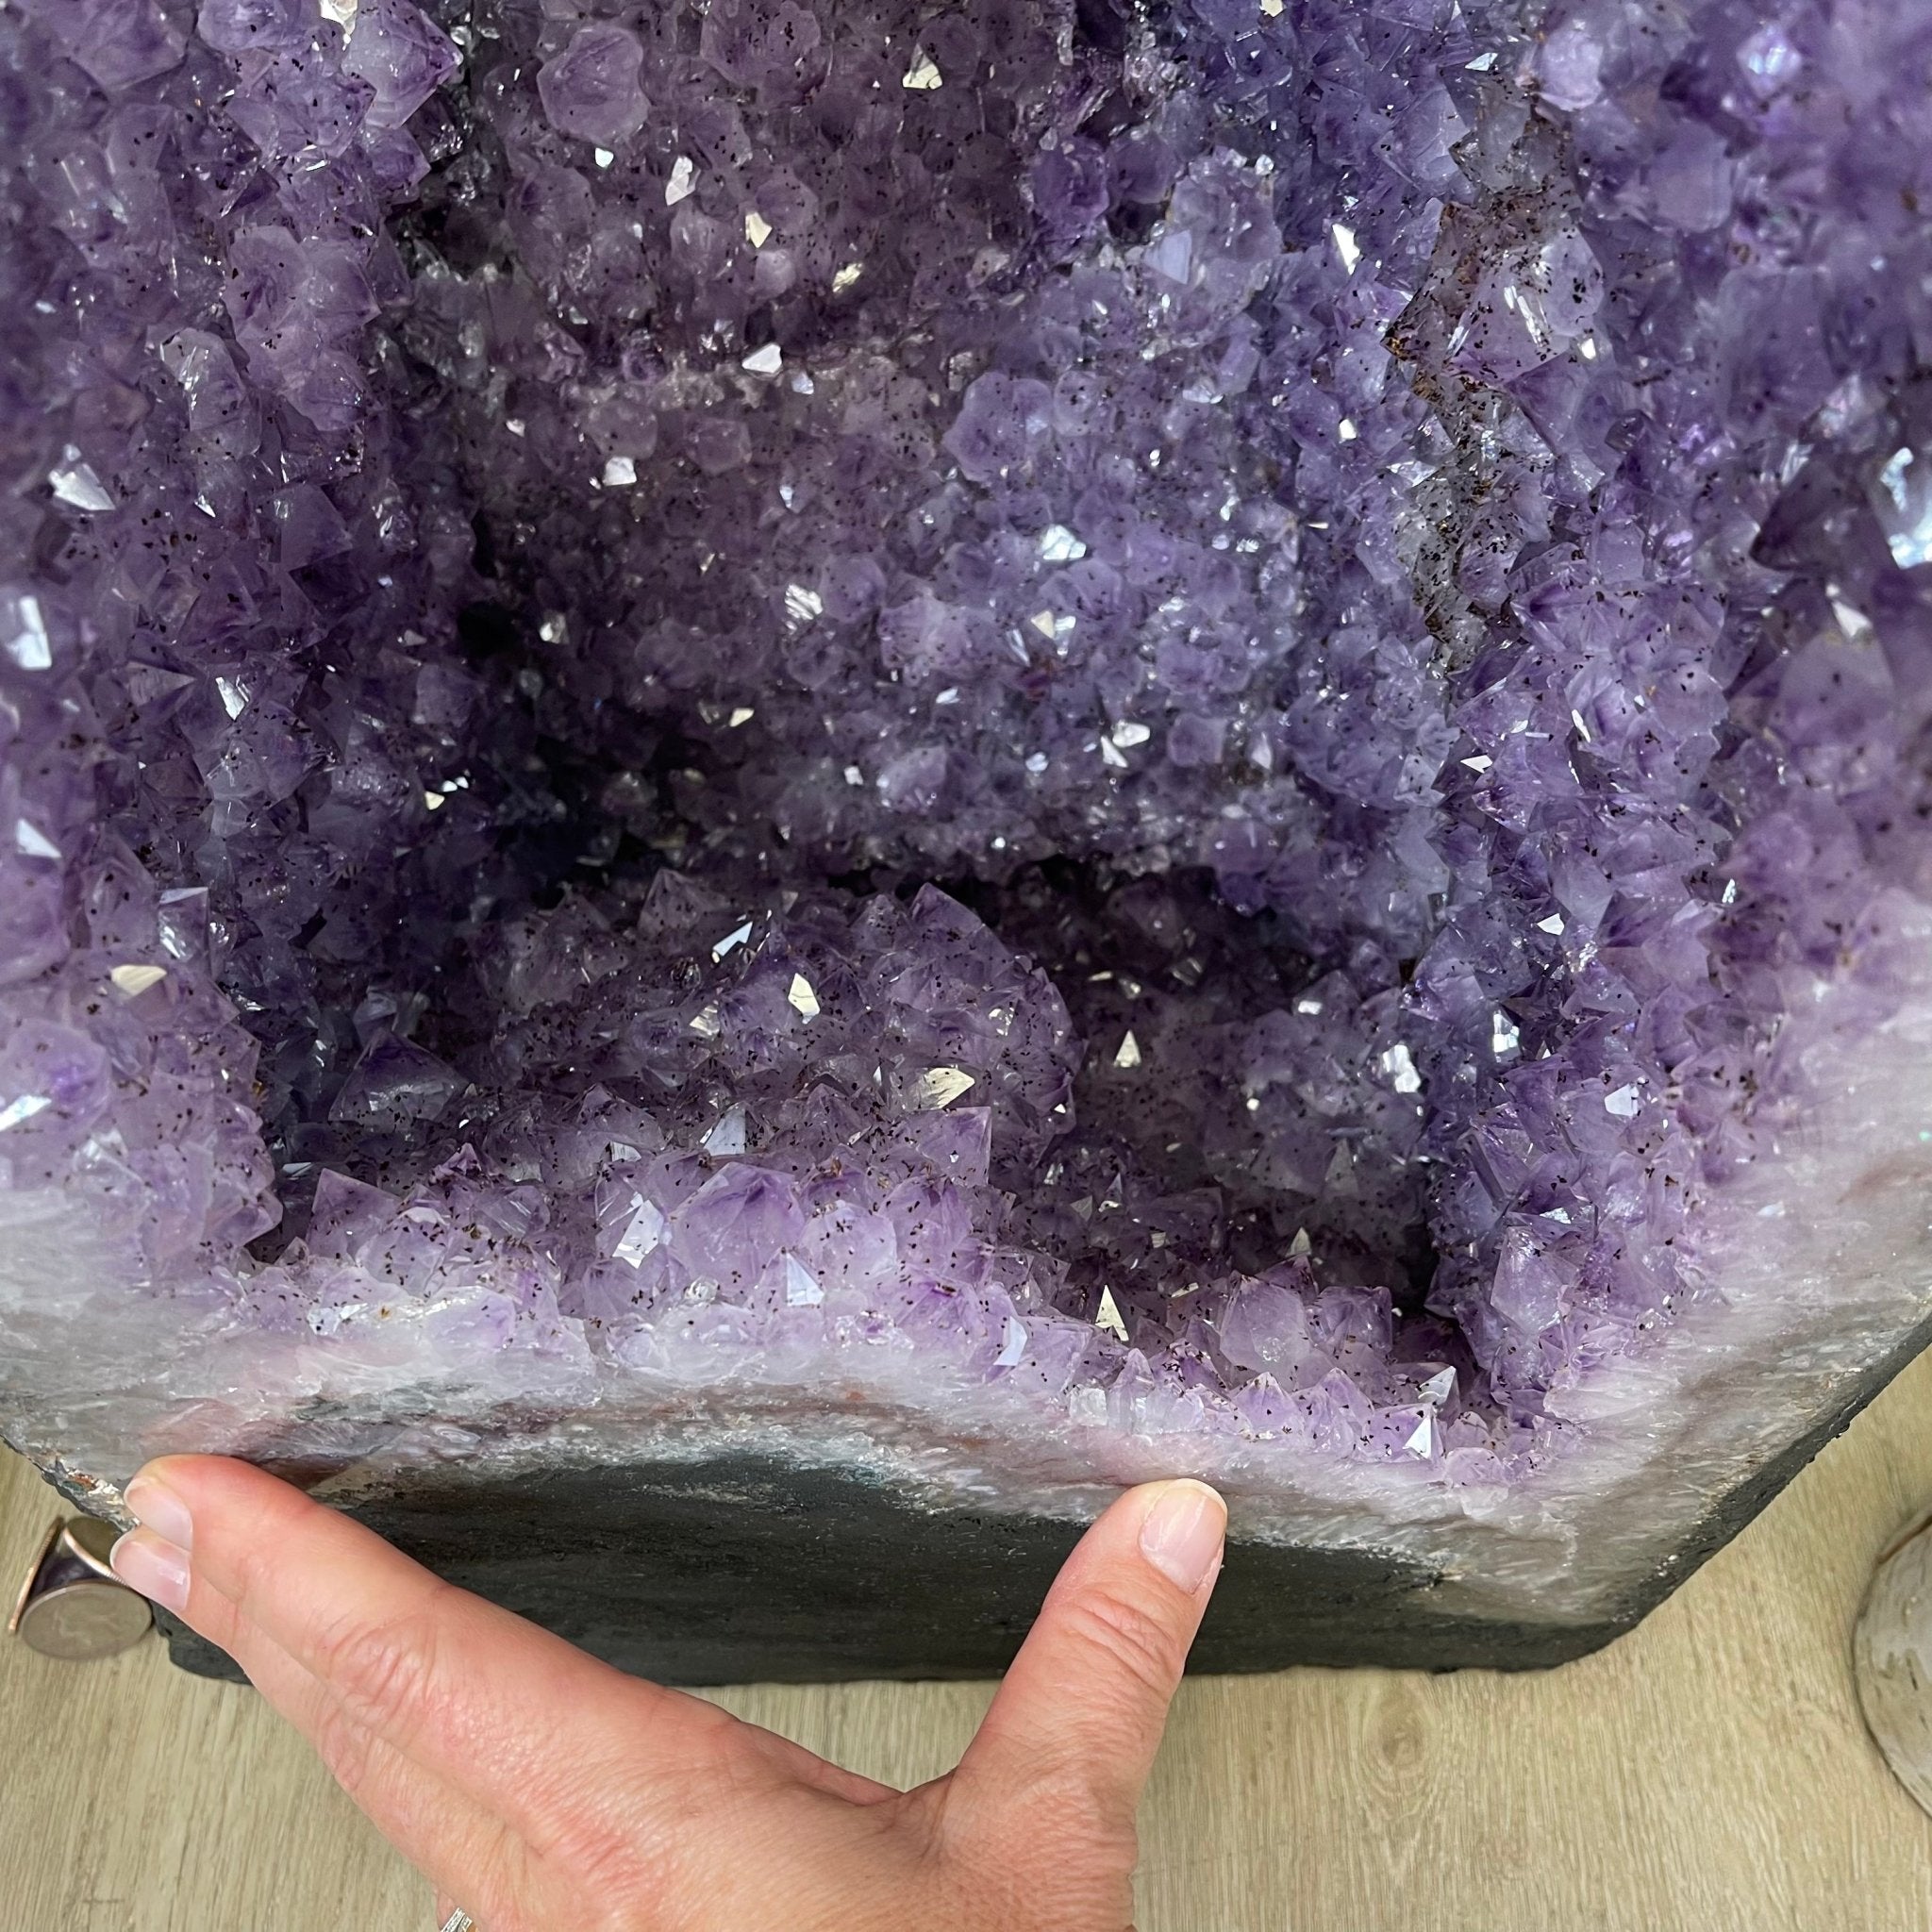 Large Standard Plus Quality Brazilian Amethyst Cathedral, 204 lbs & 39.9" Tall #5601-1180 by Brazil Gems - Brazil GemsBrazil GemsLarge Standard Plus Quality Brazilian Amethyst Cathedral, 204 lbs & 39.9" Tall #5601-1180 by Brazil GemsCathedrals5601-1180